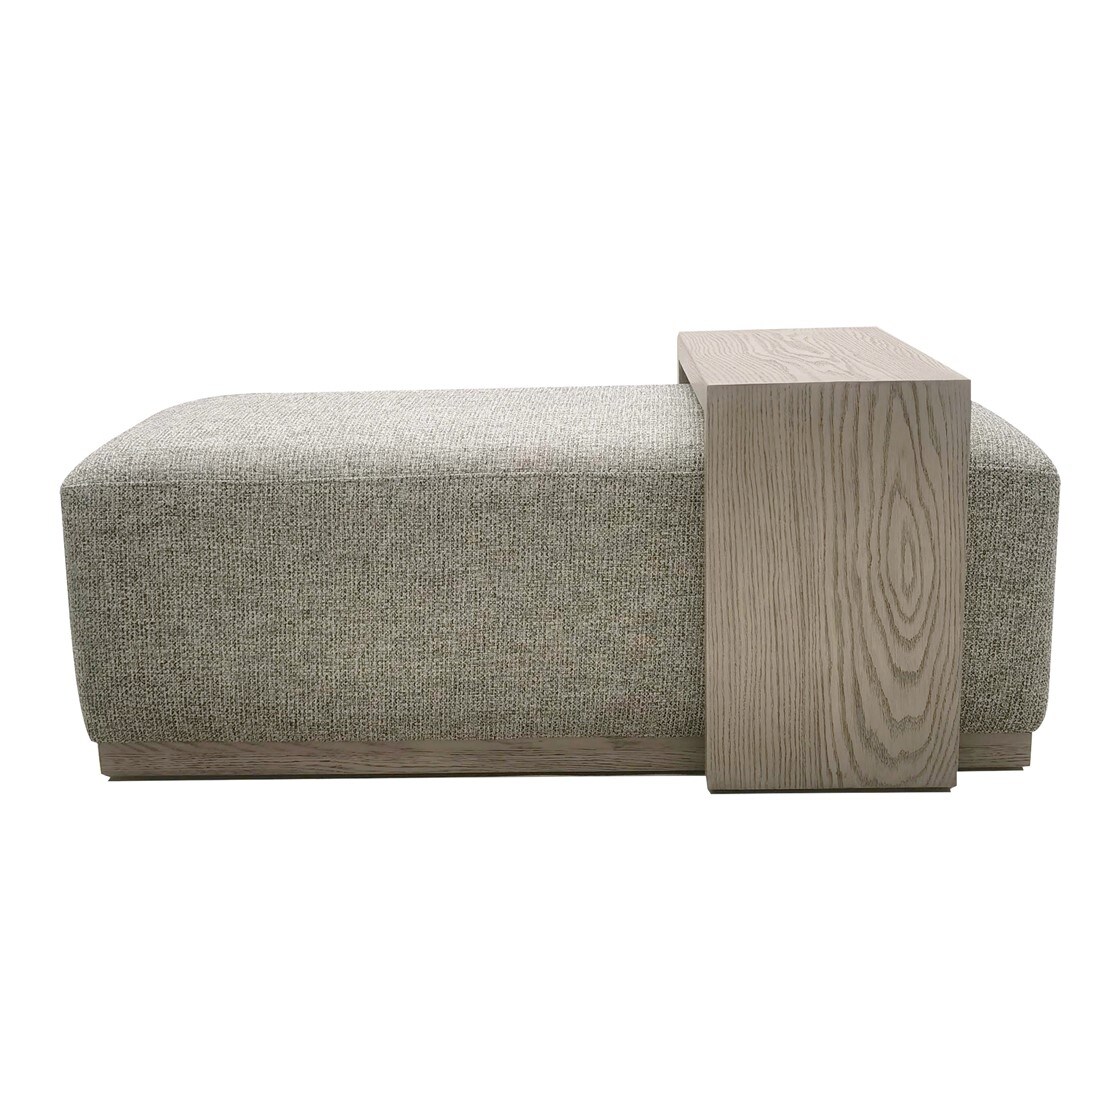 Gracie Mills   Meza Elevate Your Space with Our Bench/Cocktail Ottoman Combo - GRACE-15696